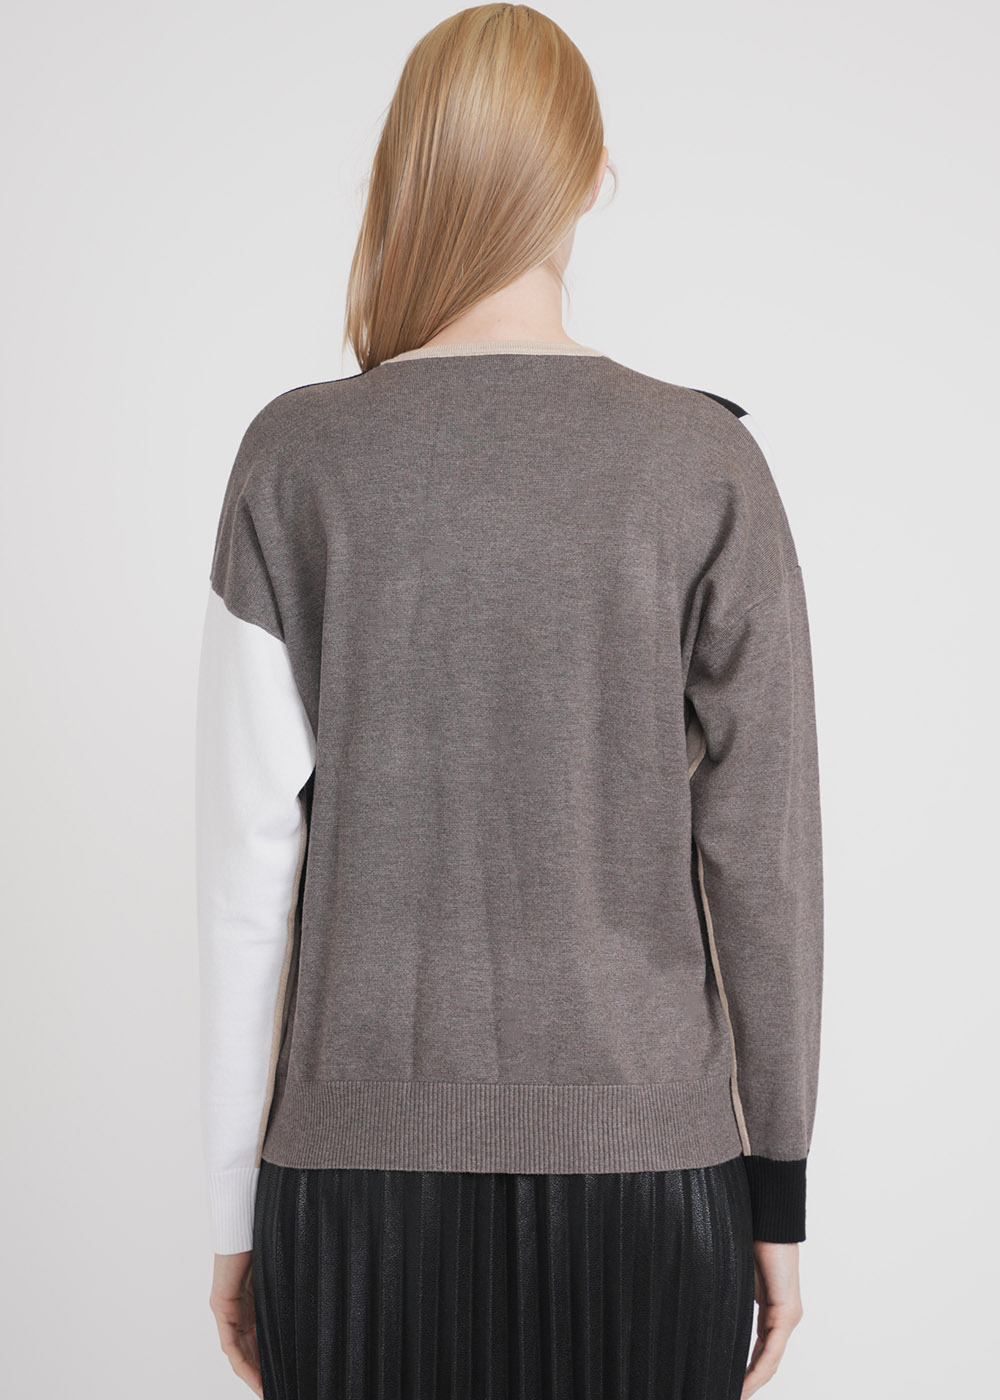 Sweater with Multi-Tone Color Blocking